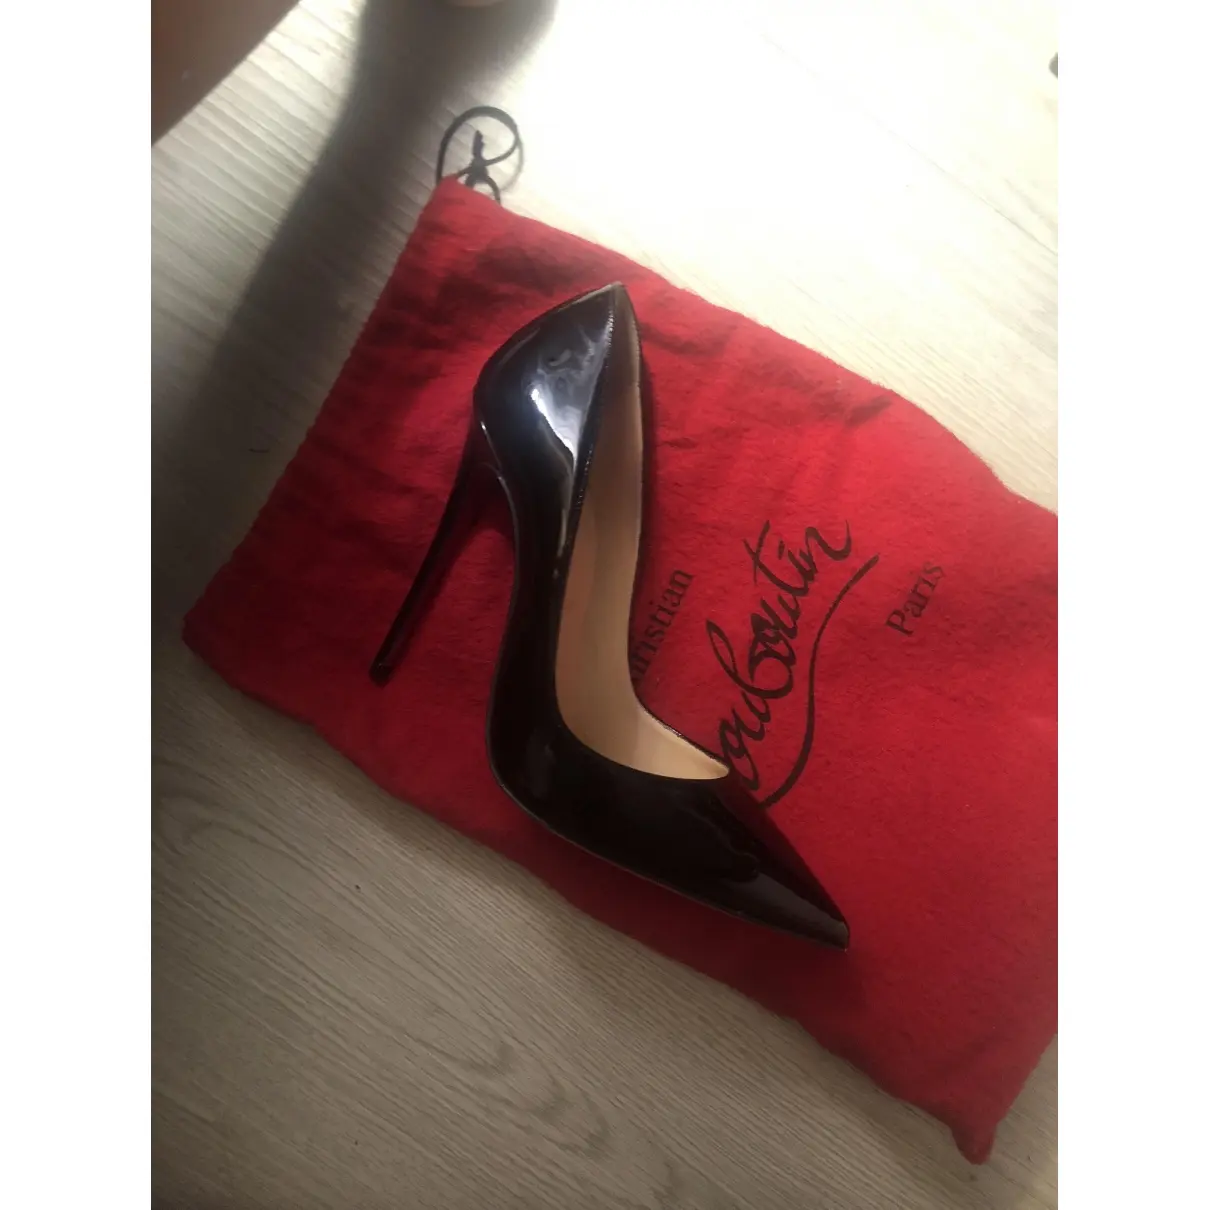 Christian Louboutin So Kate  patent leather heels for sale